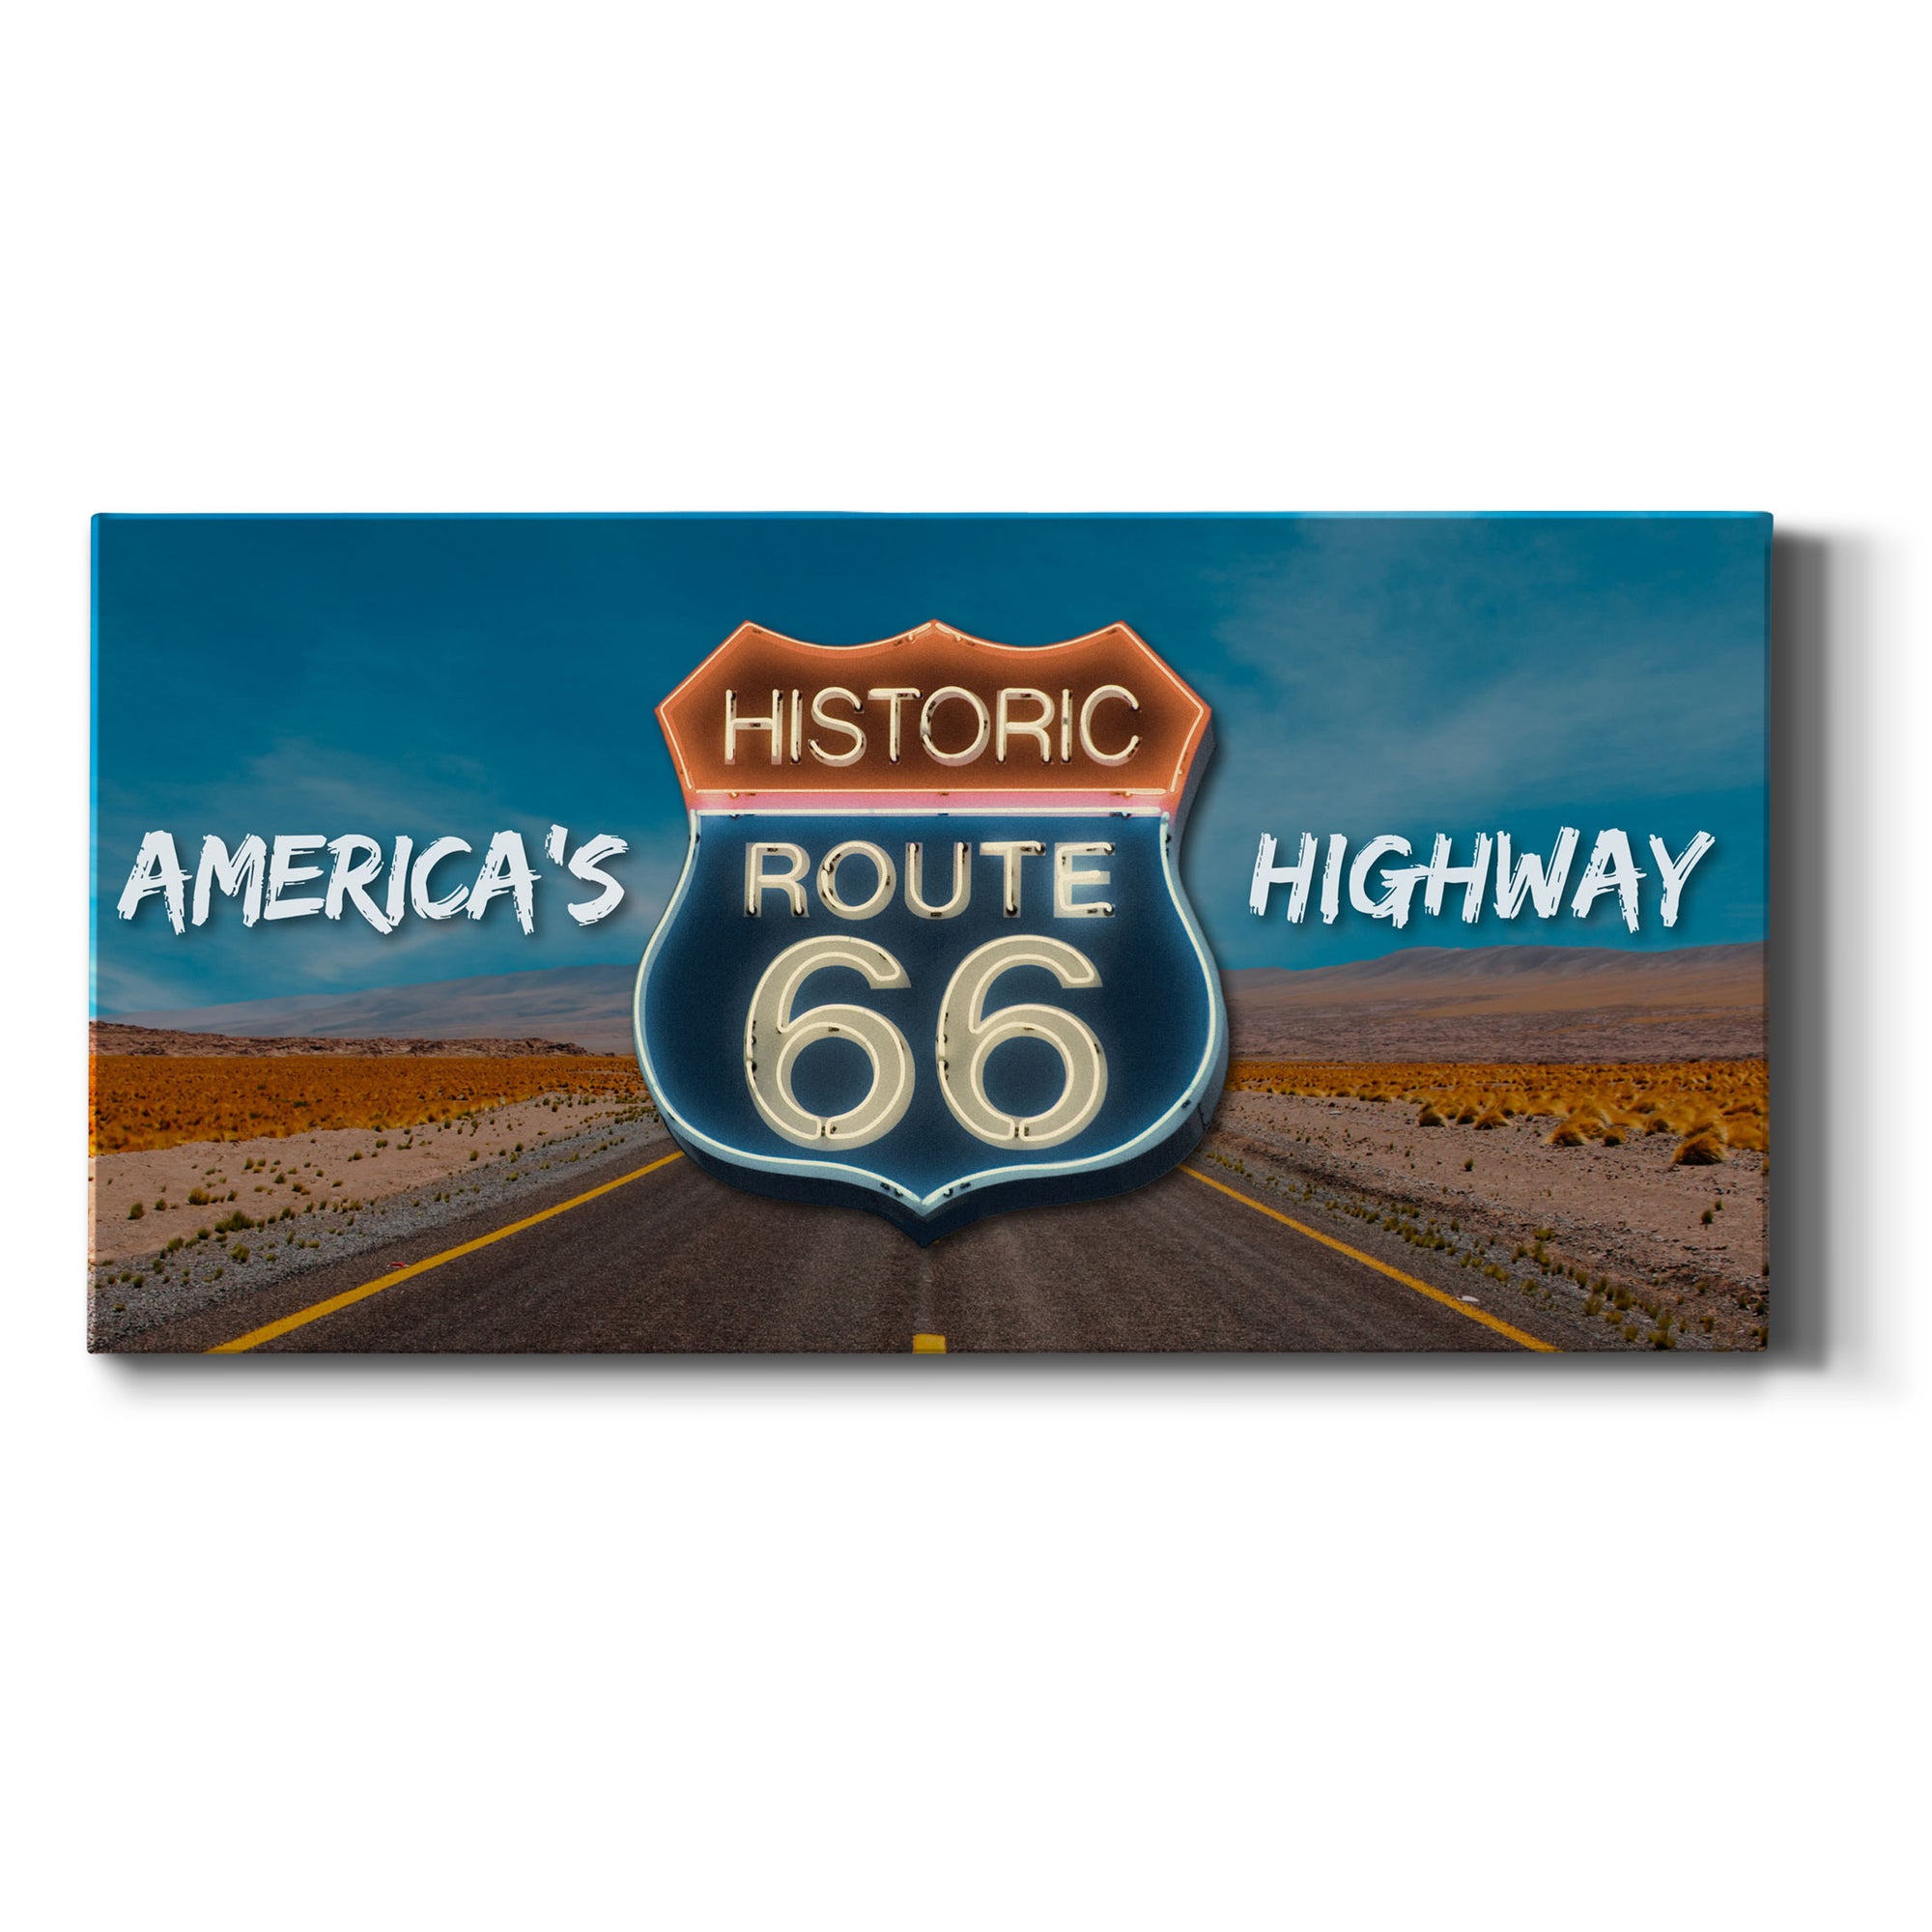 Americas Highway Route 66